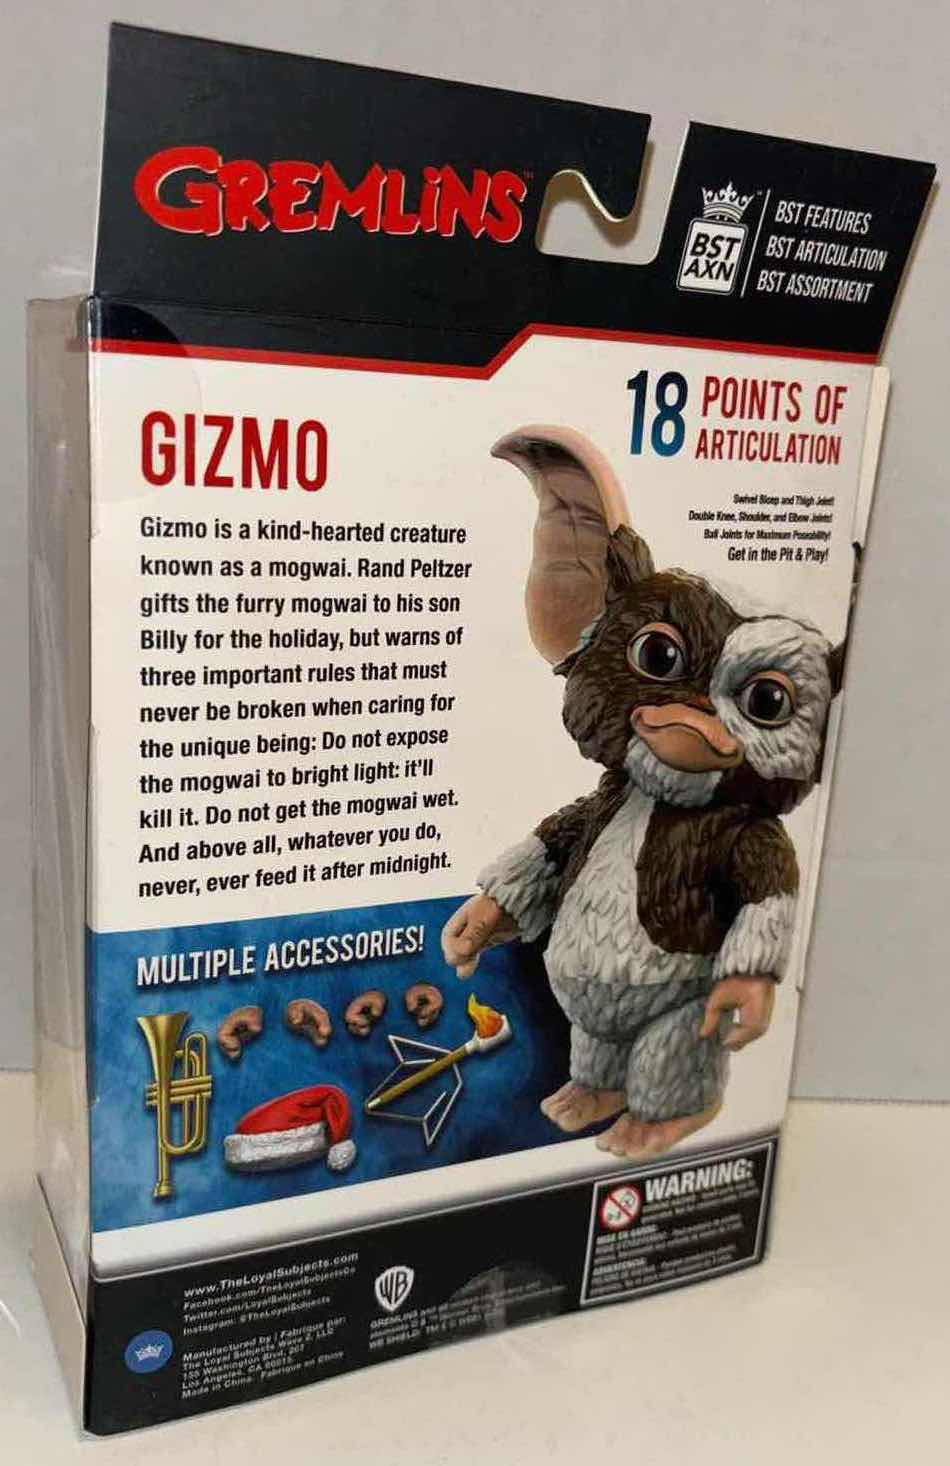 Photo 4 of NEW THE LOYAL SUBJECTS BST AXN GREMLINS “GIZMO” ACTION FIGURE & ACCESSORIES (1)